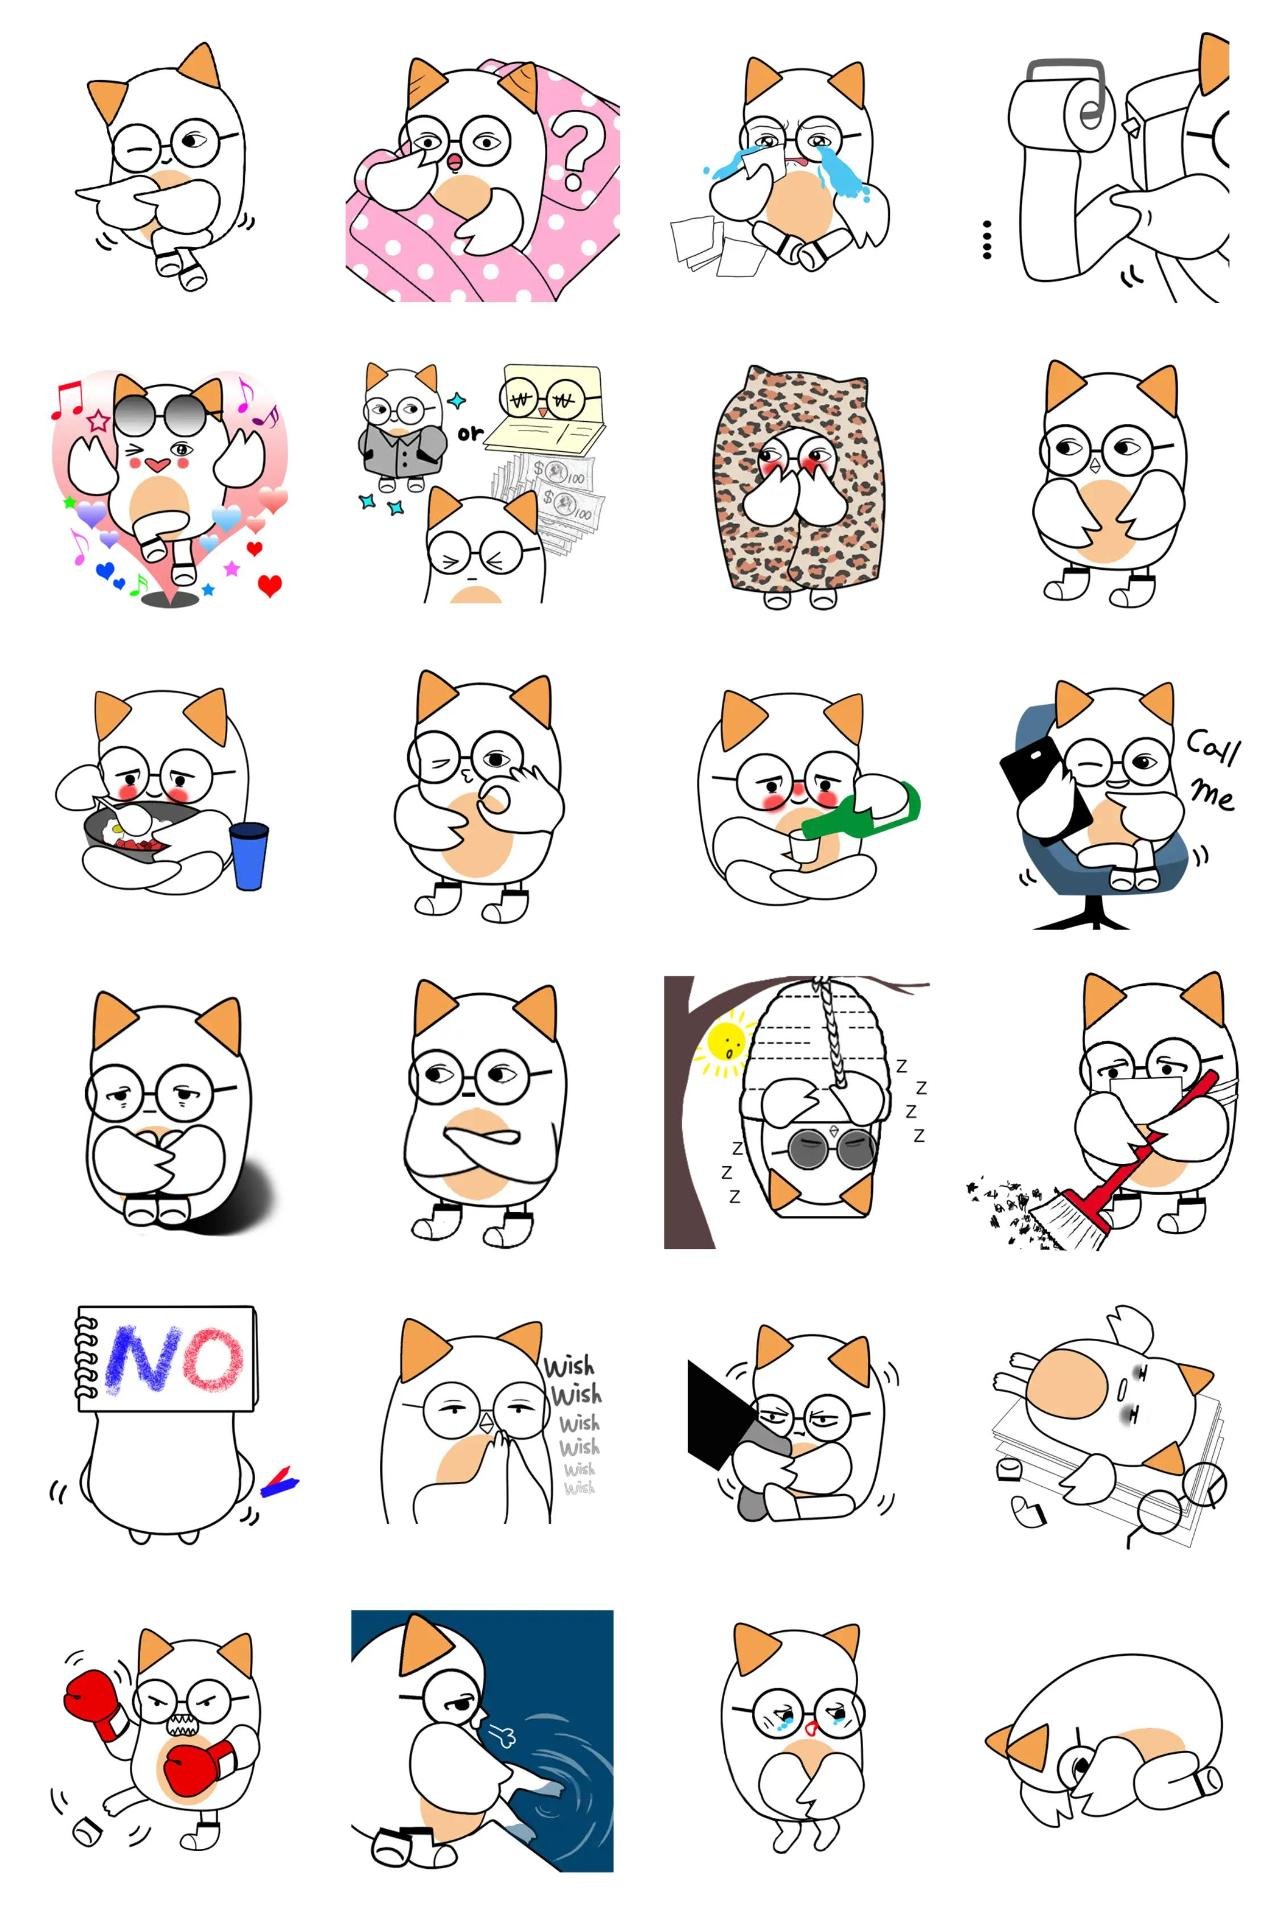 Nocturnal Blangi Animals sticker pack for Whatsapp, Telegram, Signal, and others chatting and message apps